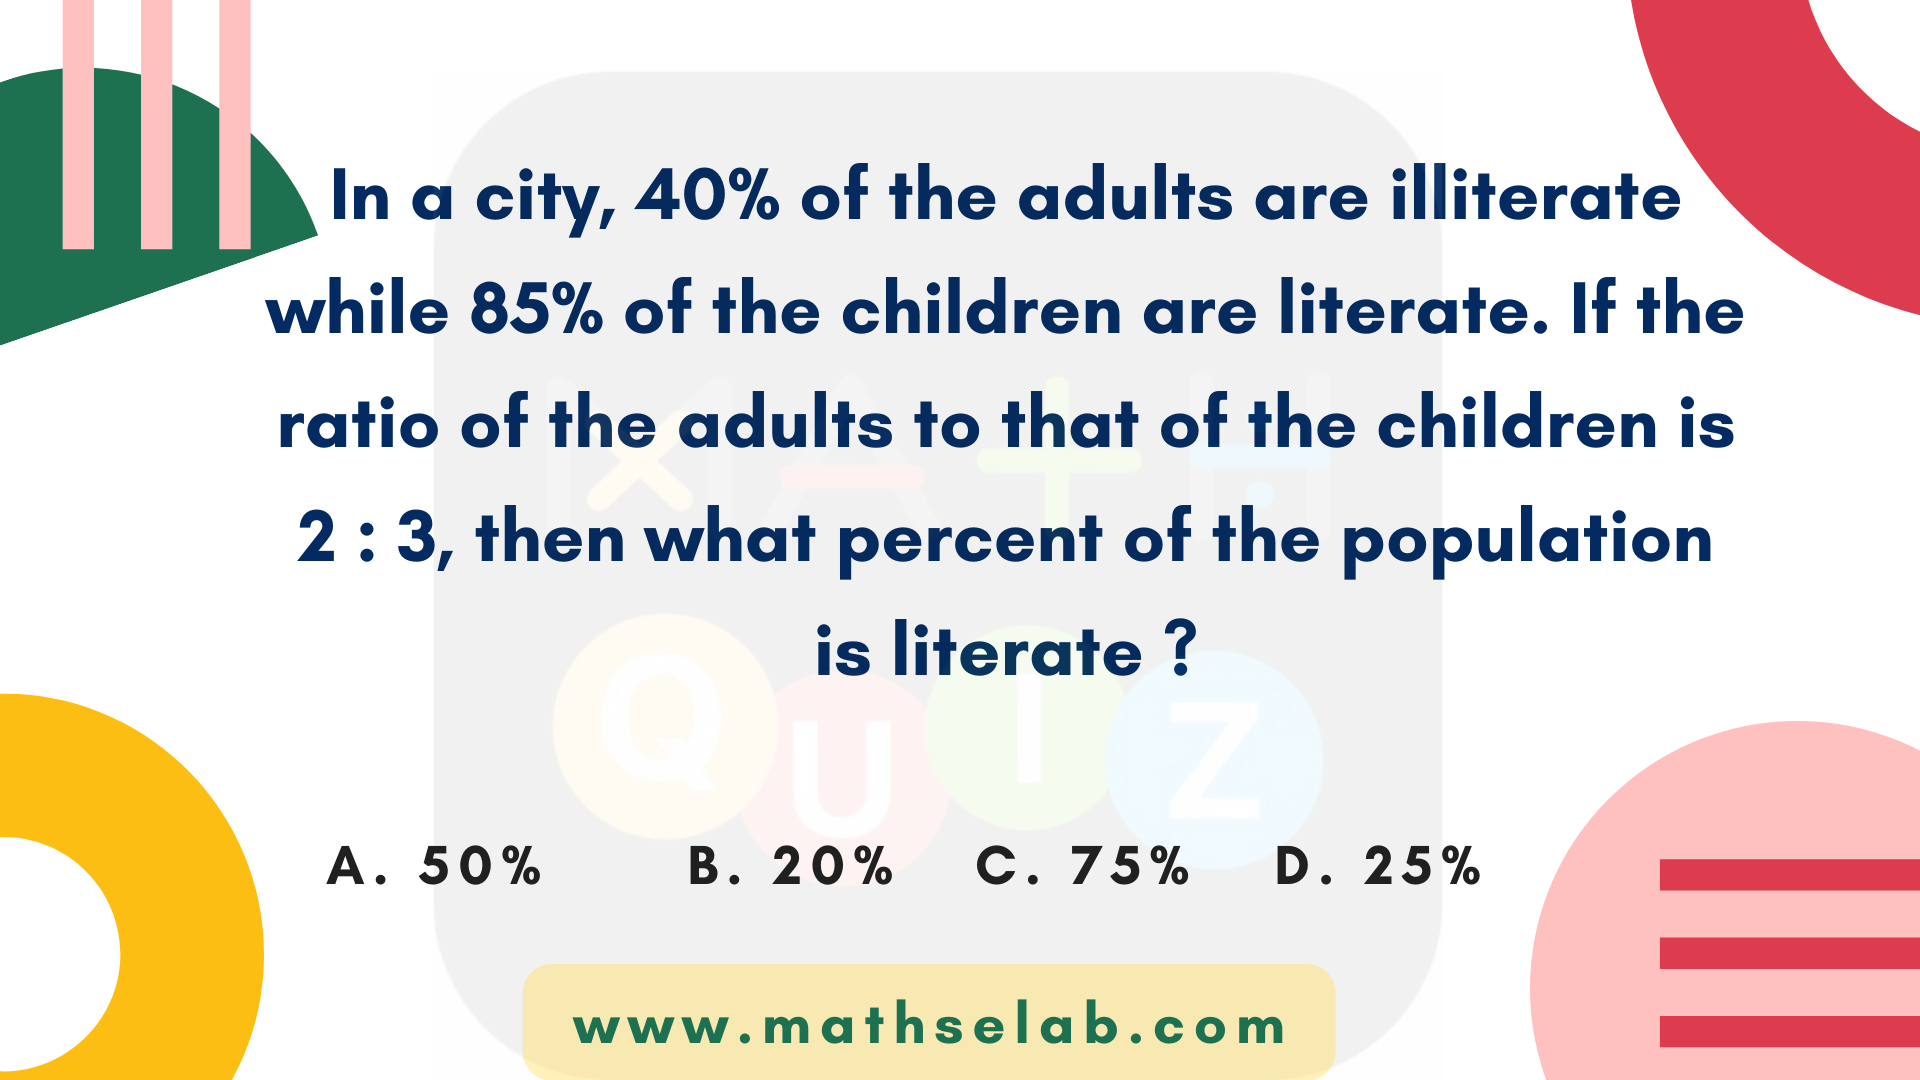 In a city, 40% of the adults are illiterate while 85% of the children are literate. If the ratio of the adults to that of the children is 2 : 3, then what percent of the population is literate ?